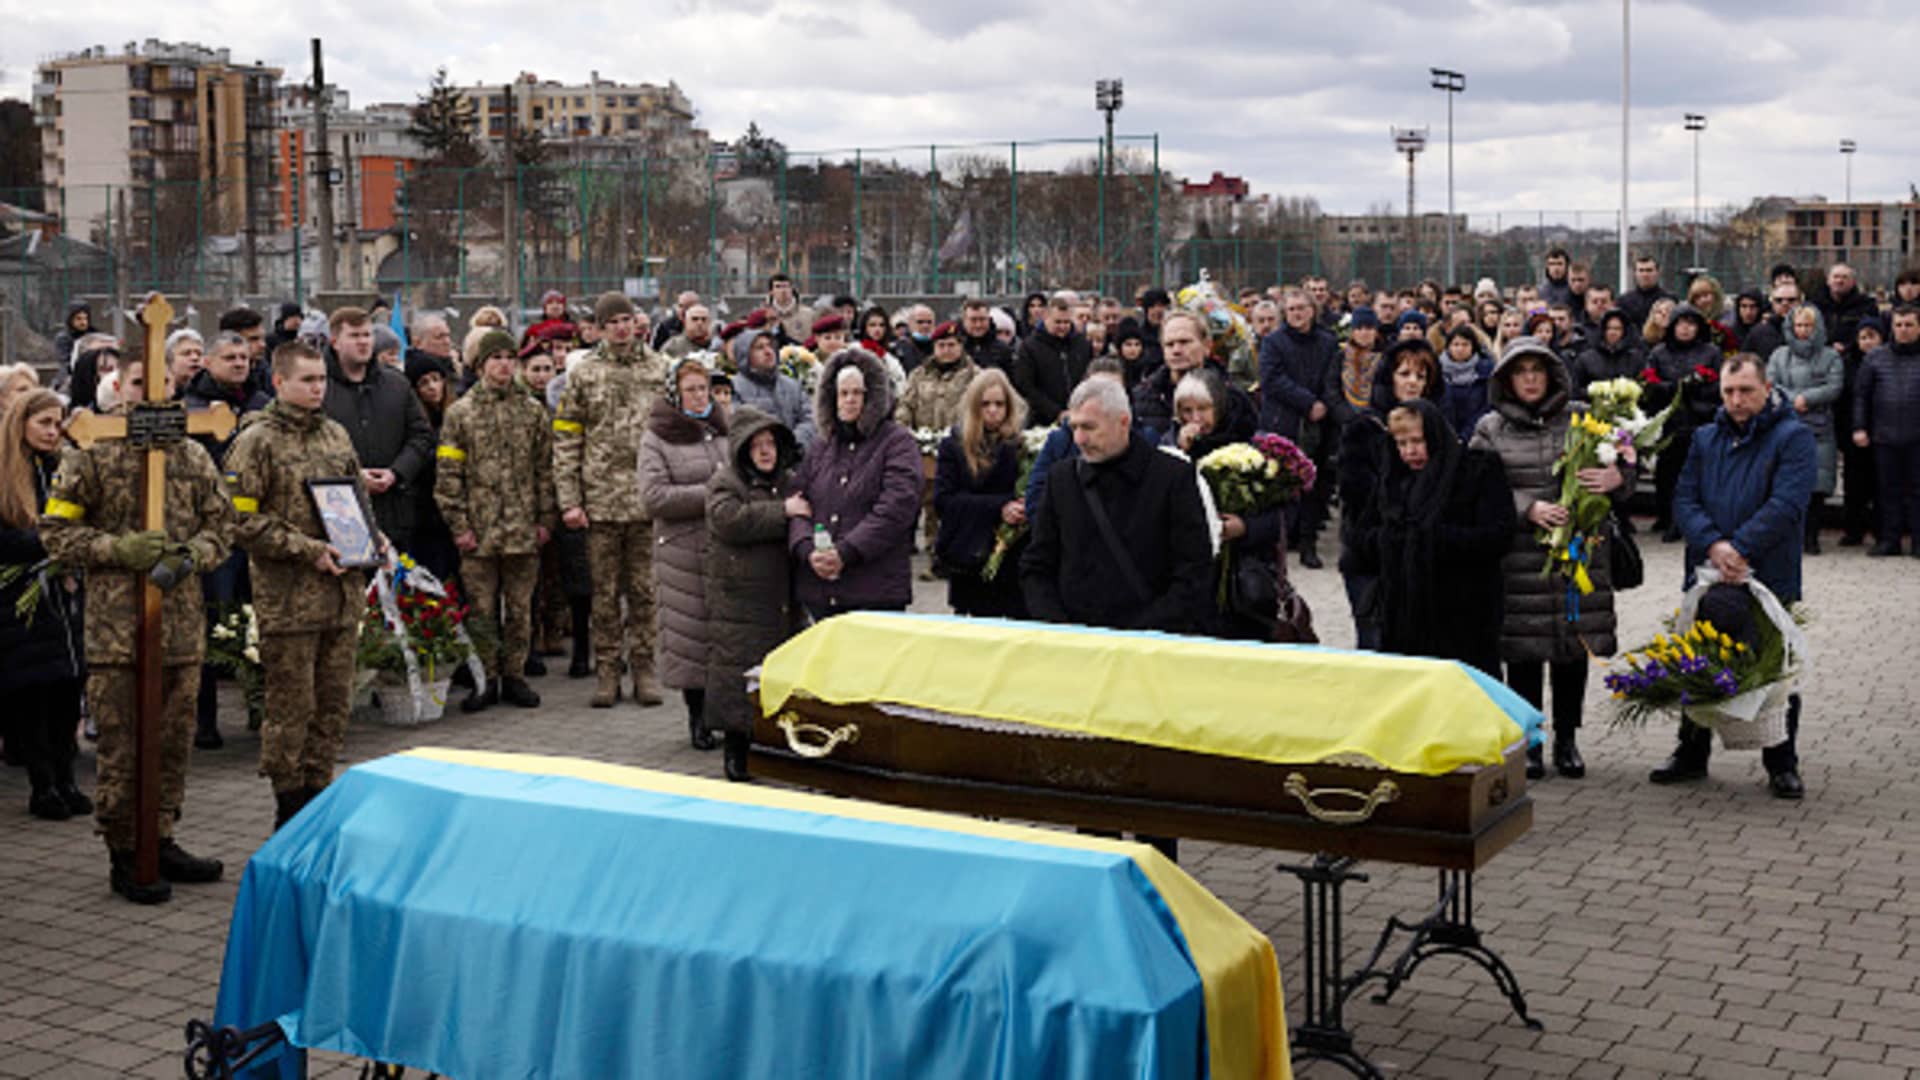 A service takes place at Lychakiv cemetery during a joint funeral for two soldiers who died in the east of the country during recent fighting, on March 08, 2022 in Lviv, Ukraine.